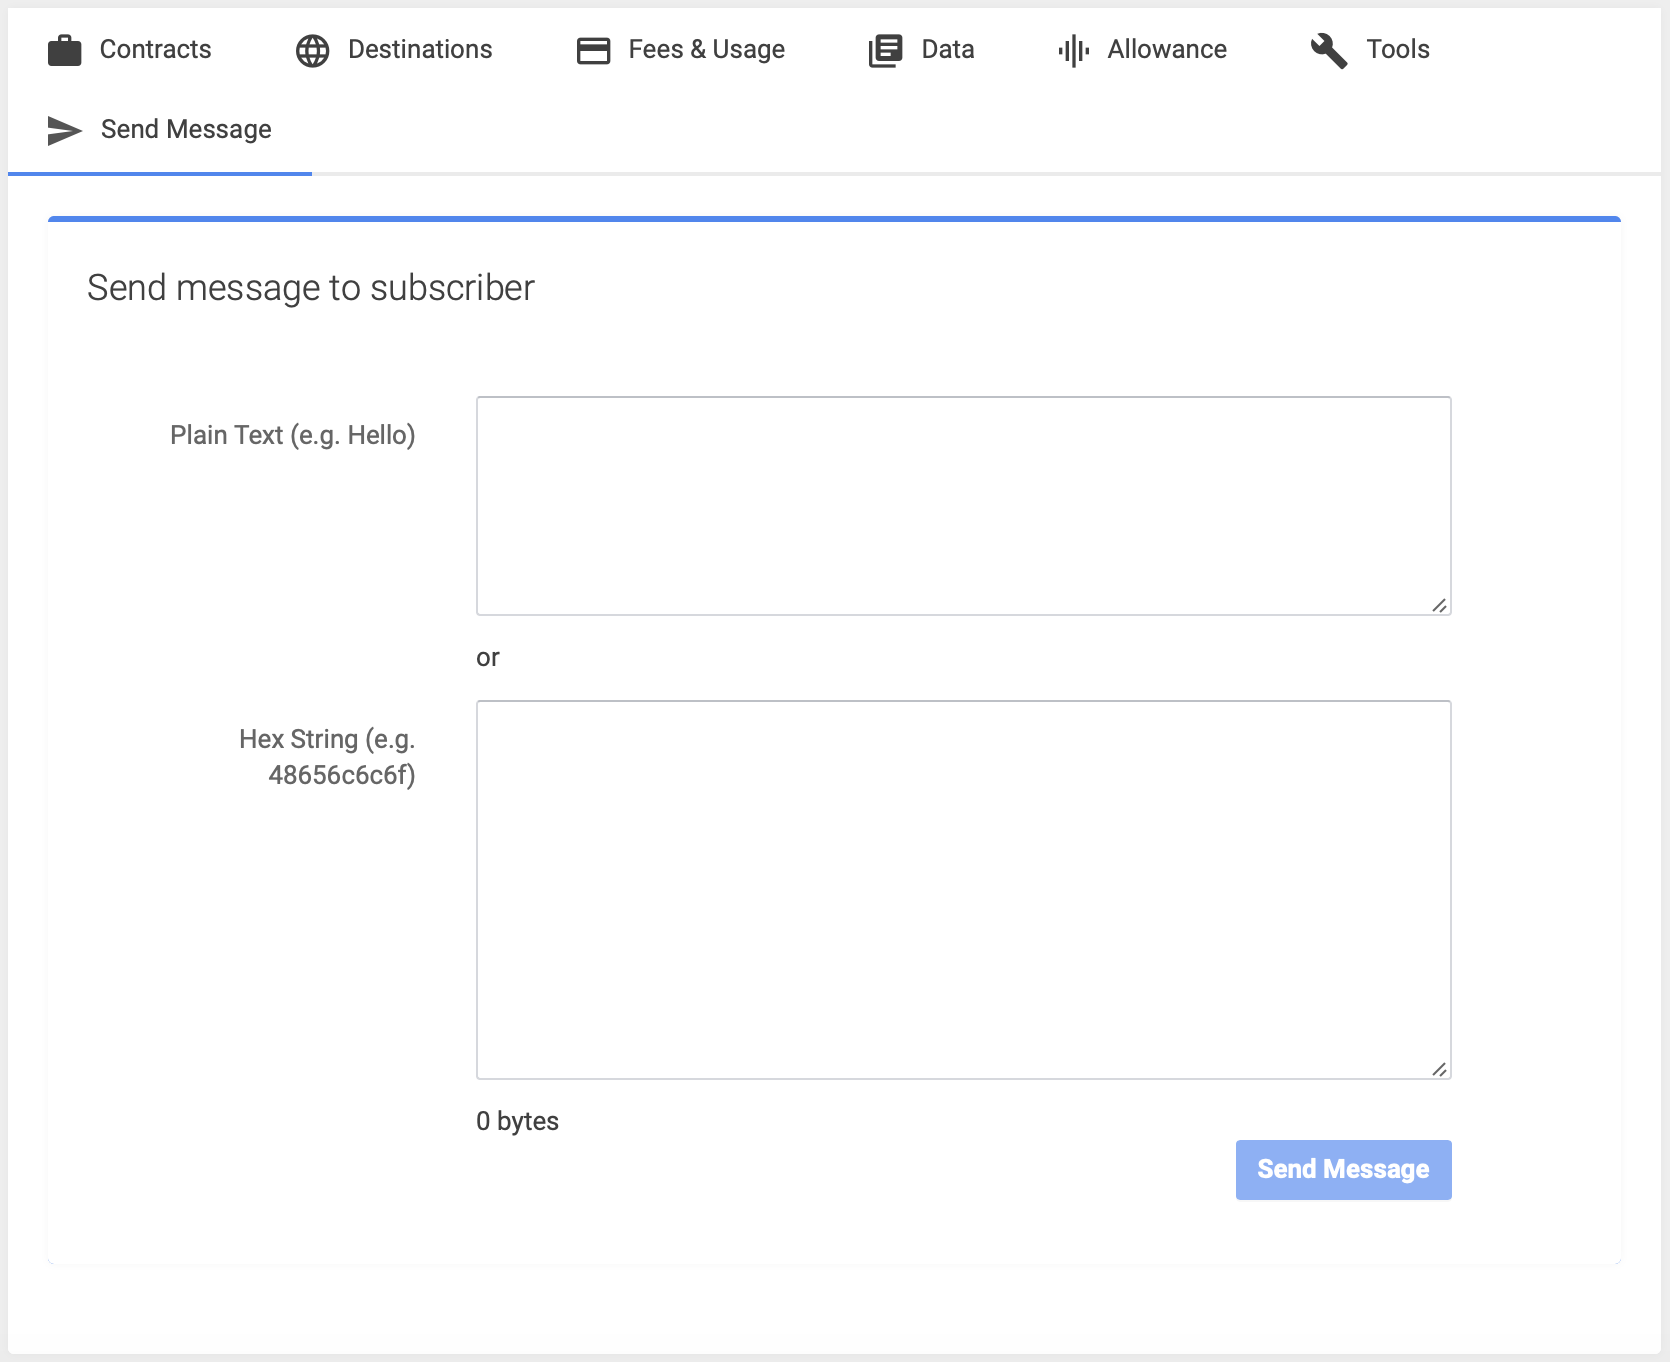 The Send Message tab is only visible if the subscriber has cloudloop set as one of its destinations.